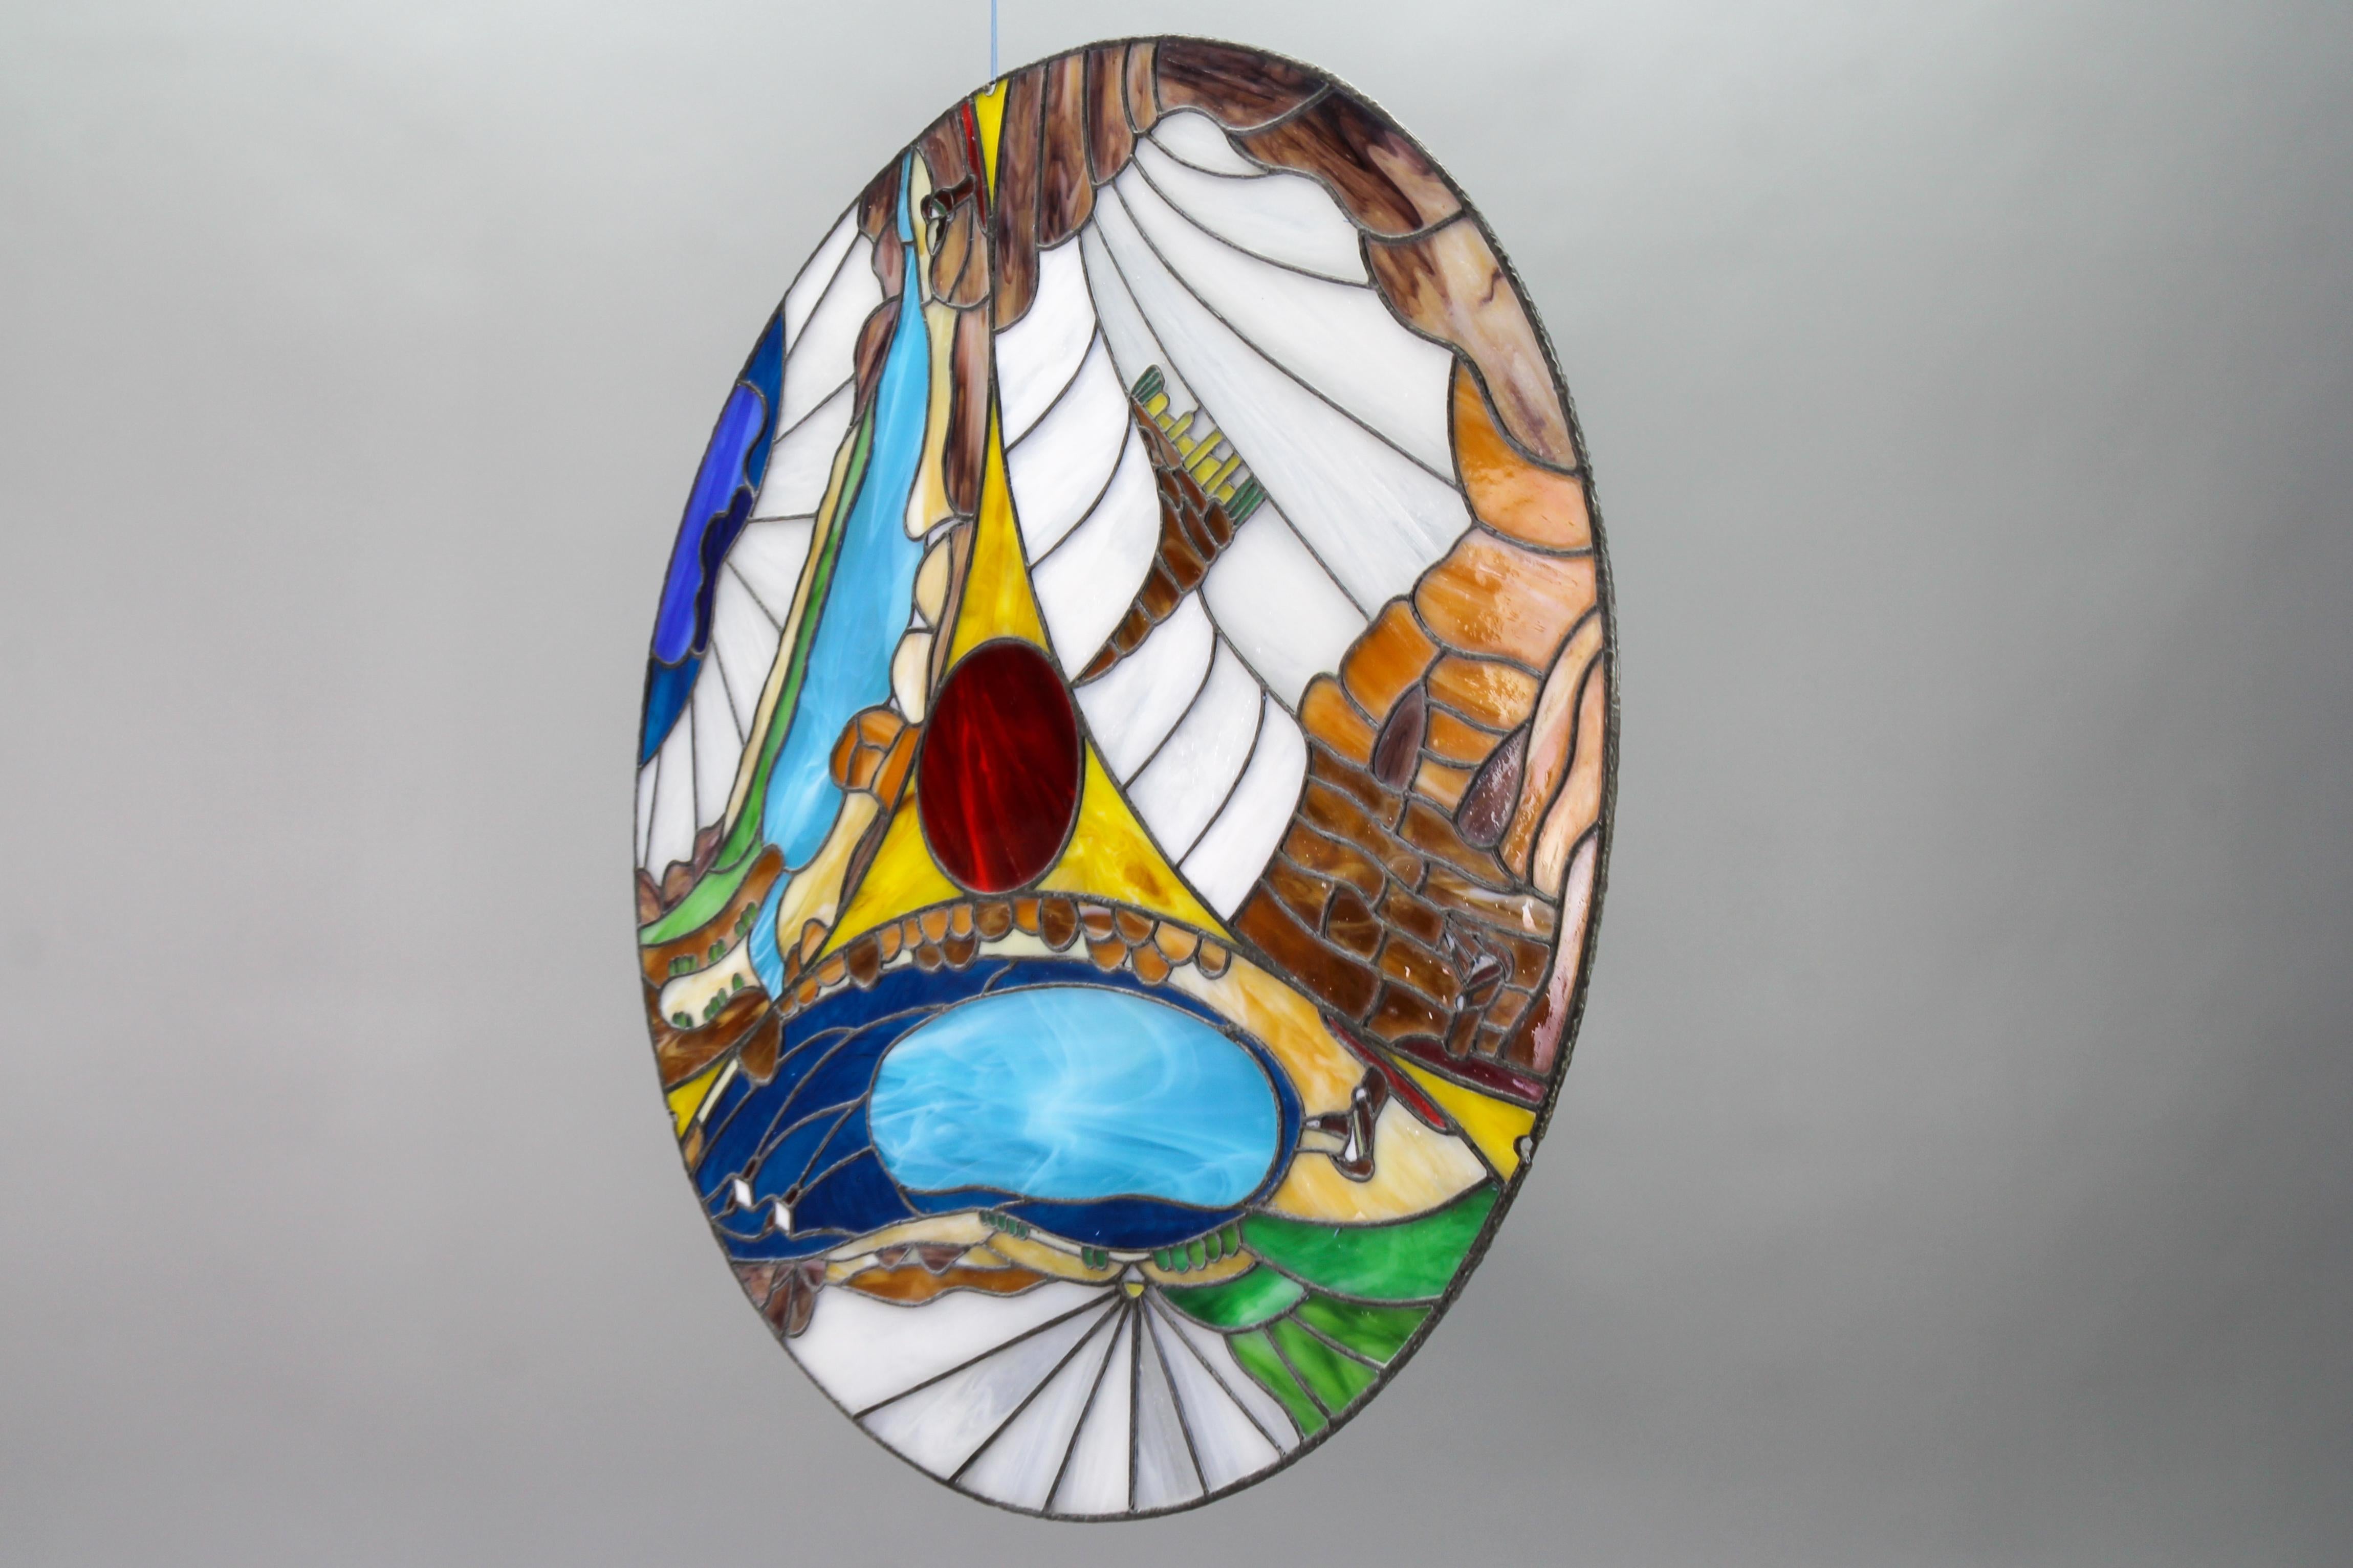 A round polychrome Tiffany-style stained glass window panel, Germany, the 1970s.
This beautiful and large round window decor or panel features an abstract composition in polychrome stained glass in Tiffany style - in blue, white, green, amber,